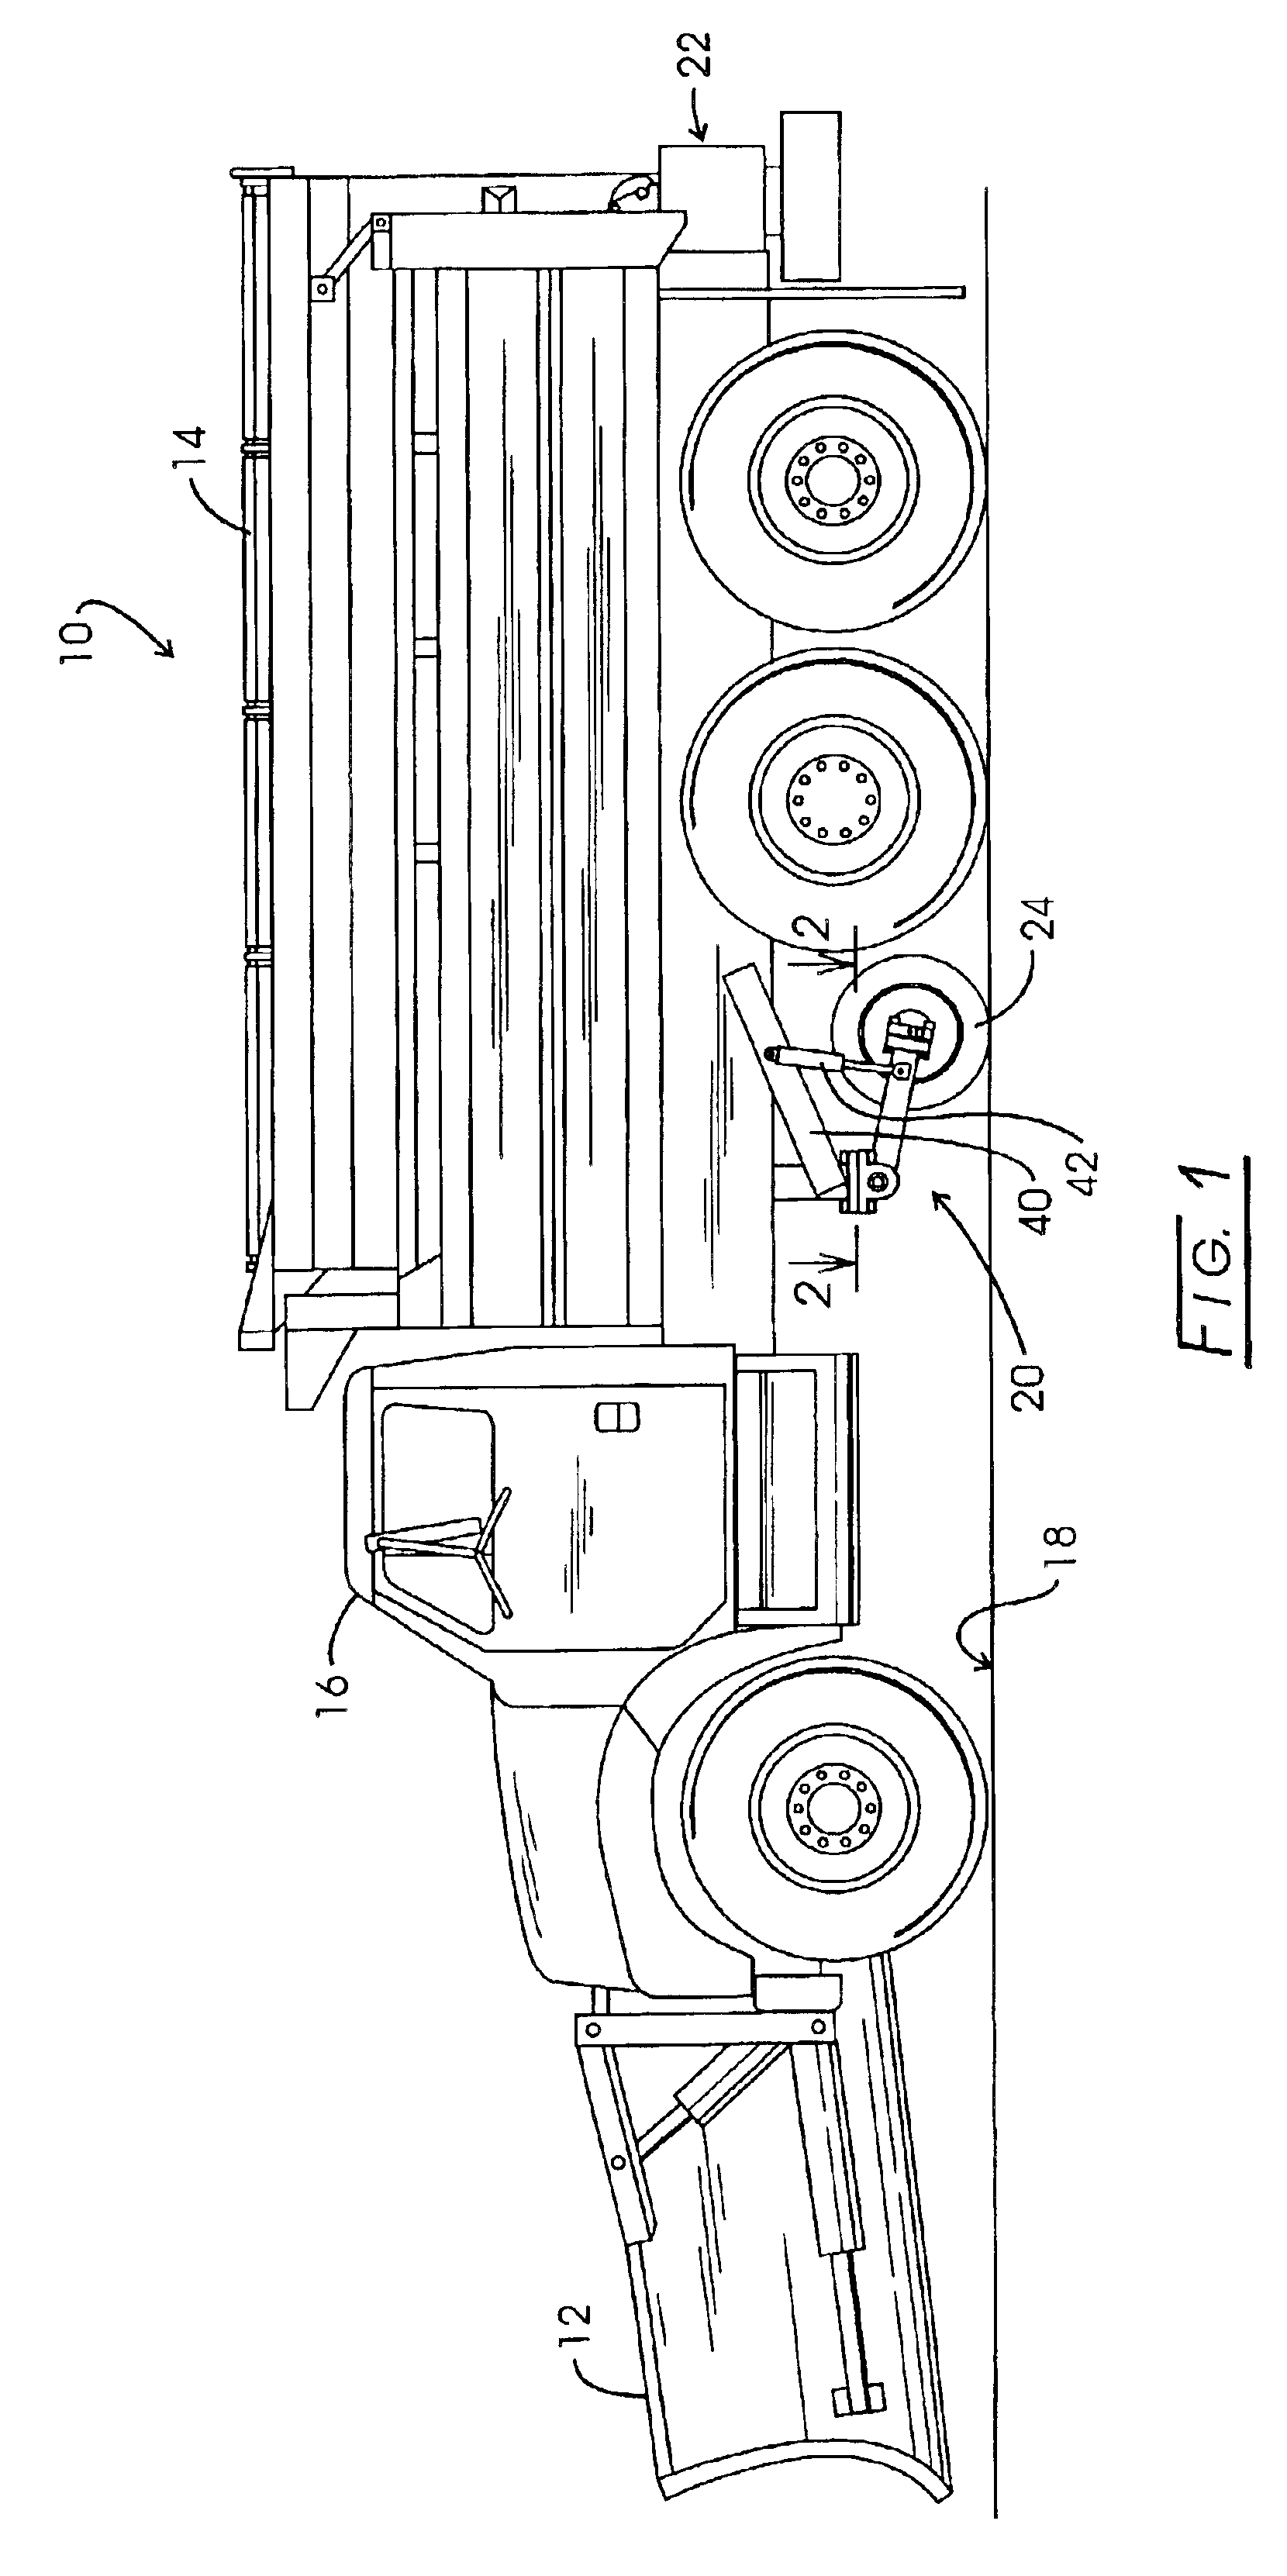 Roadway friction tester and method